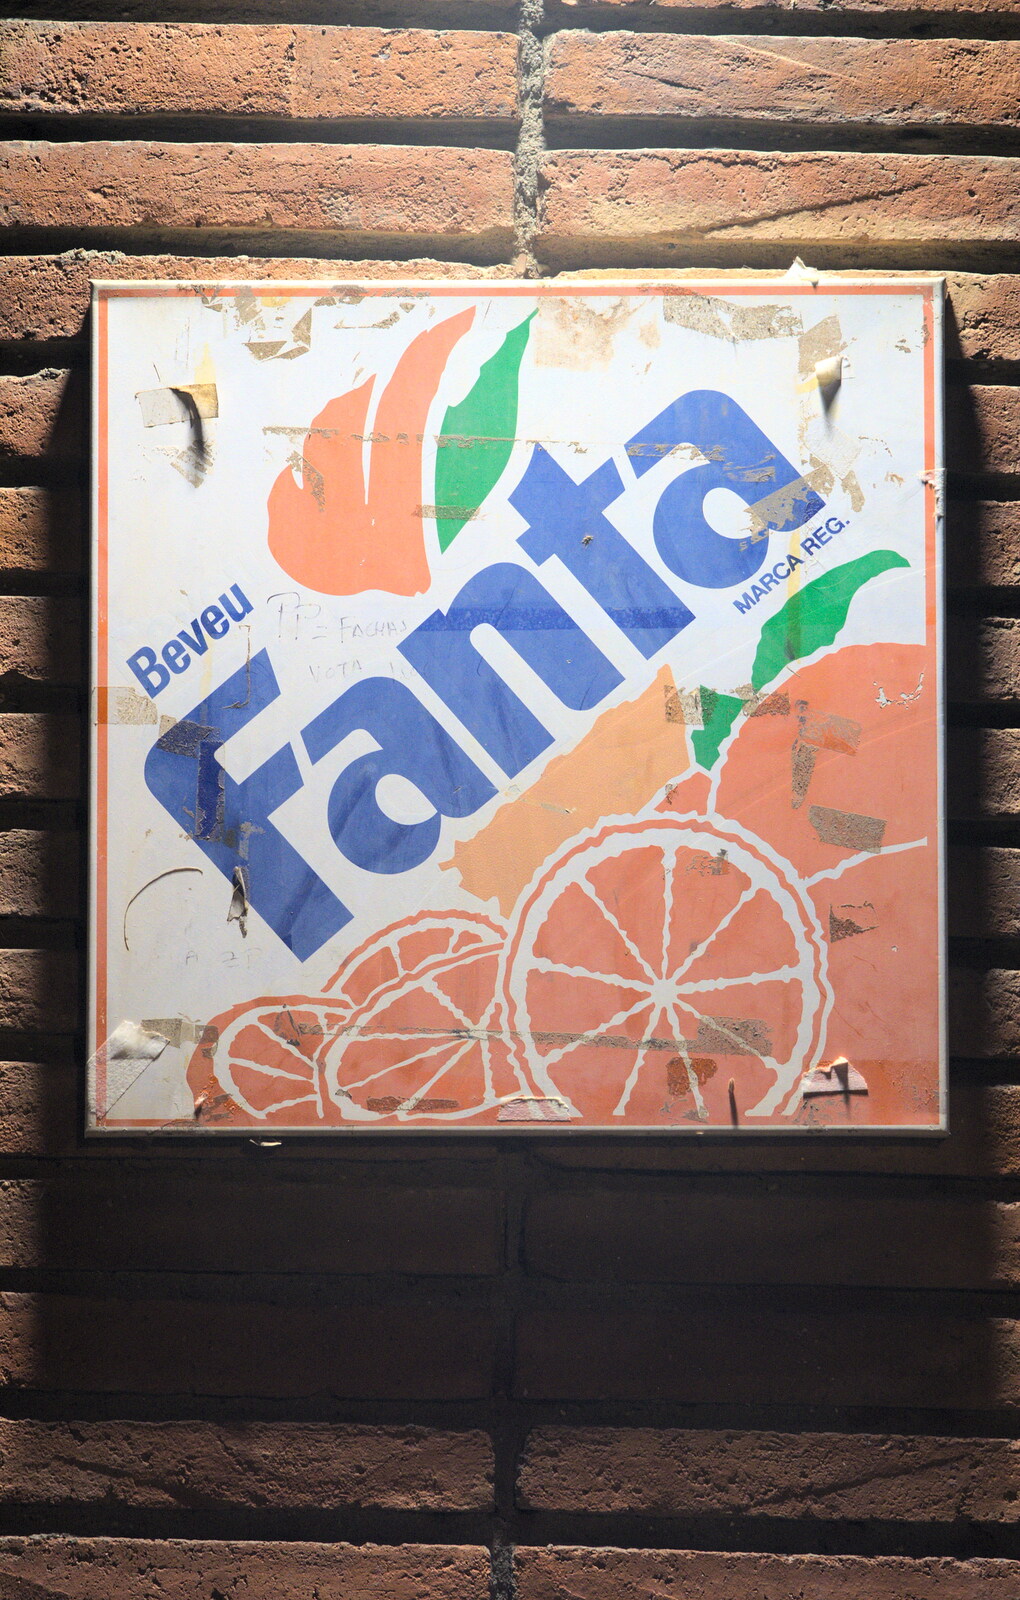 Crusty 'Fanta' café sign from The Open Education Challenge, Barcelona, Catalonia - 13th July 2014